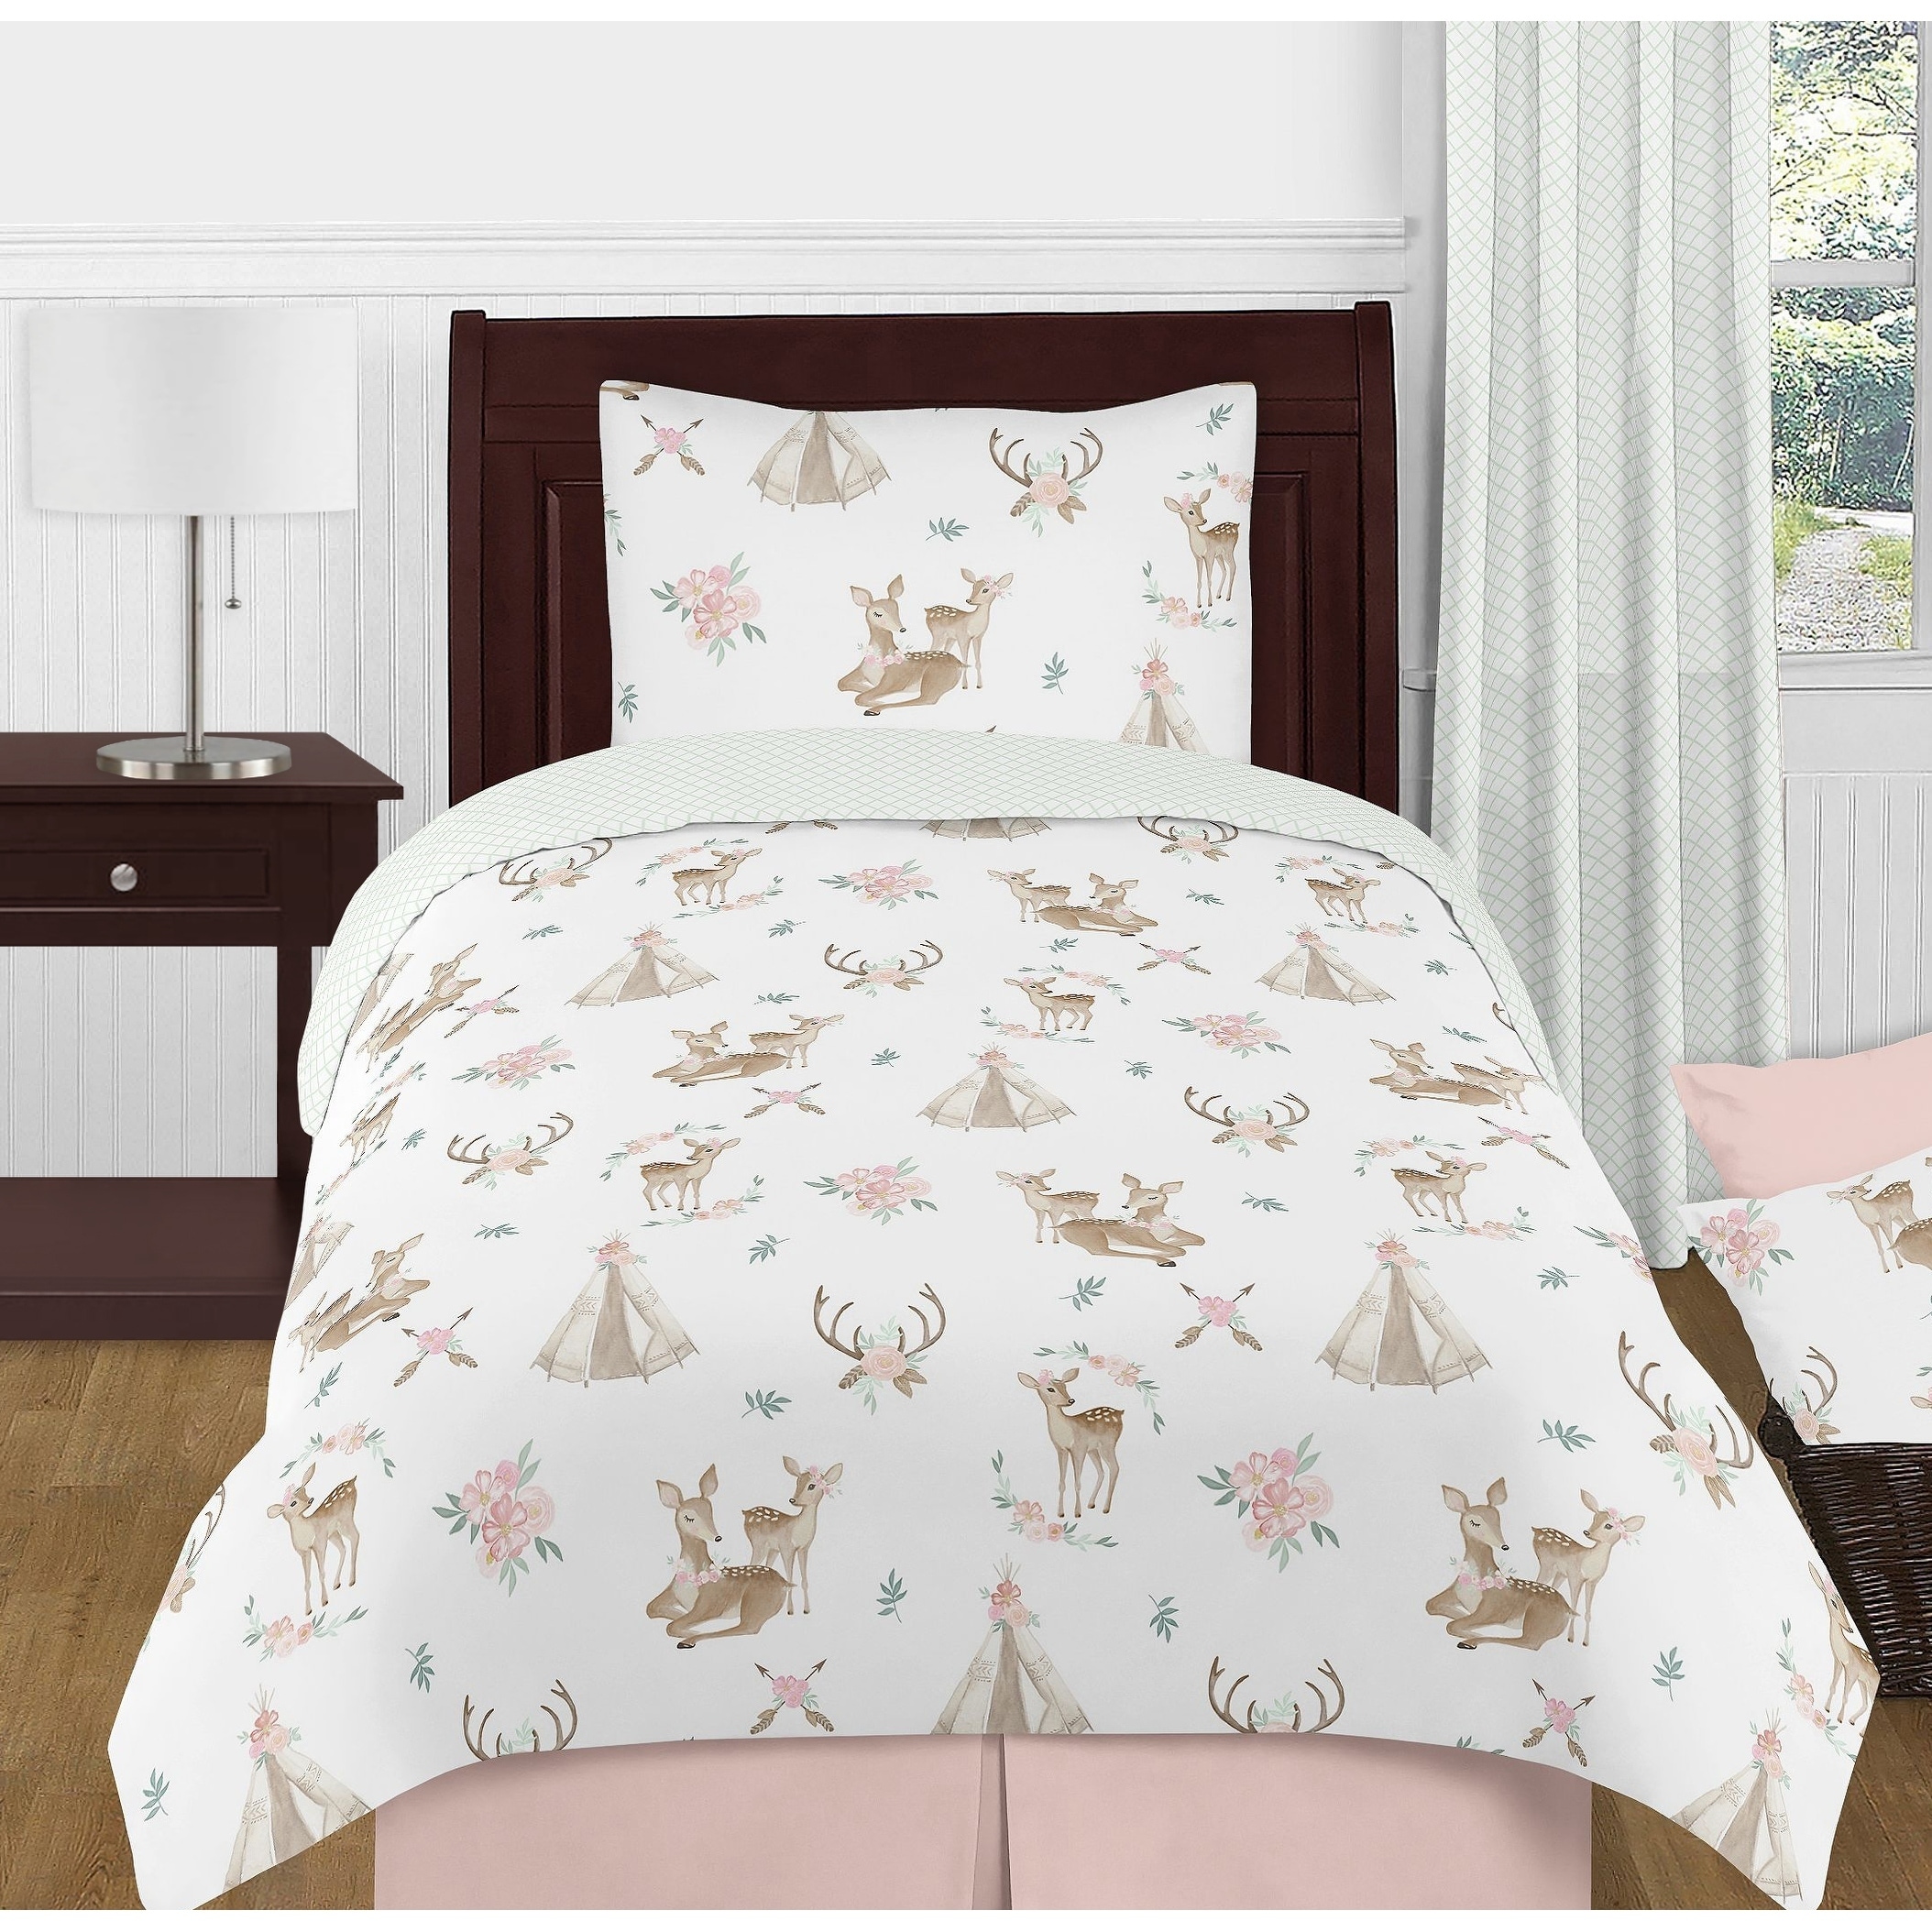 twin size comforter cover